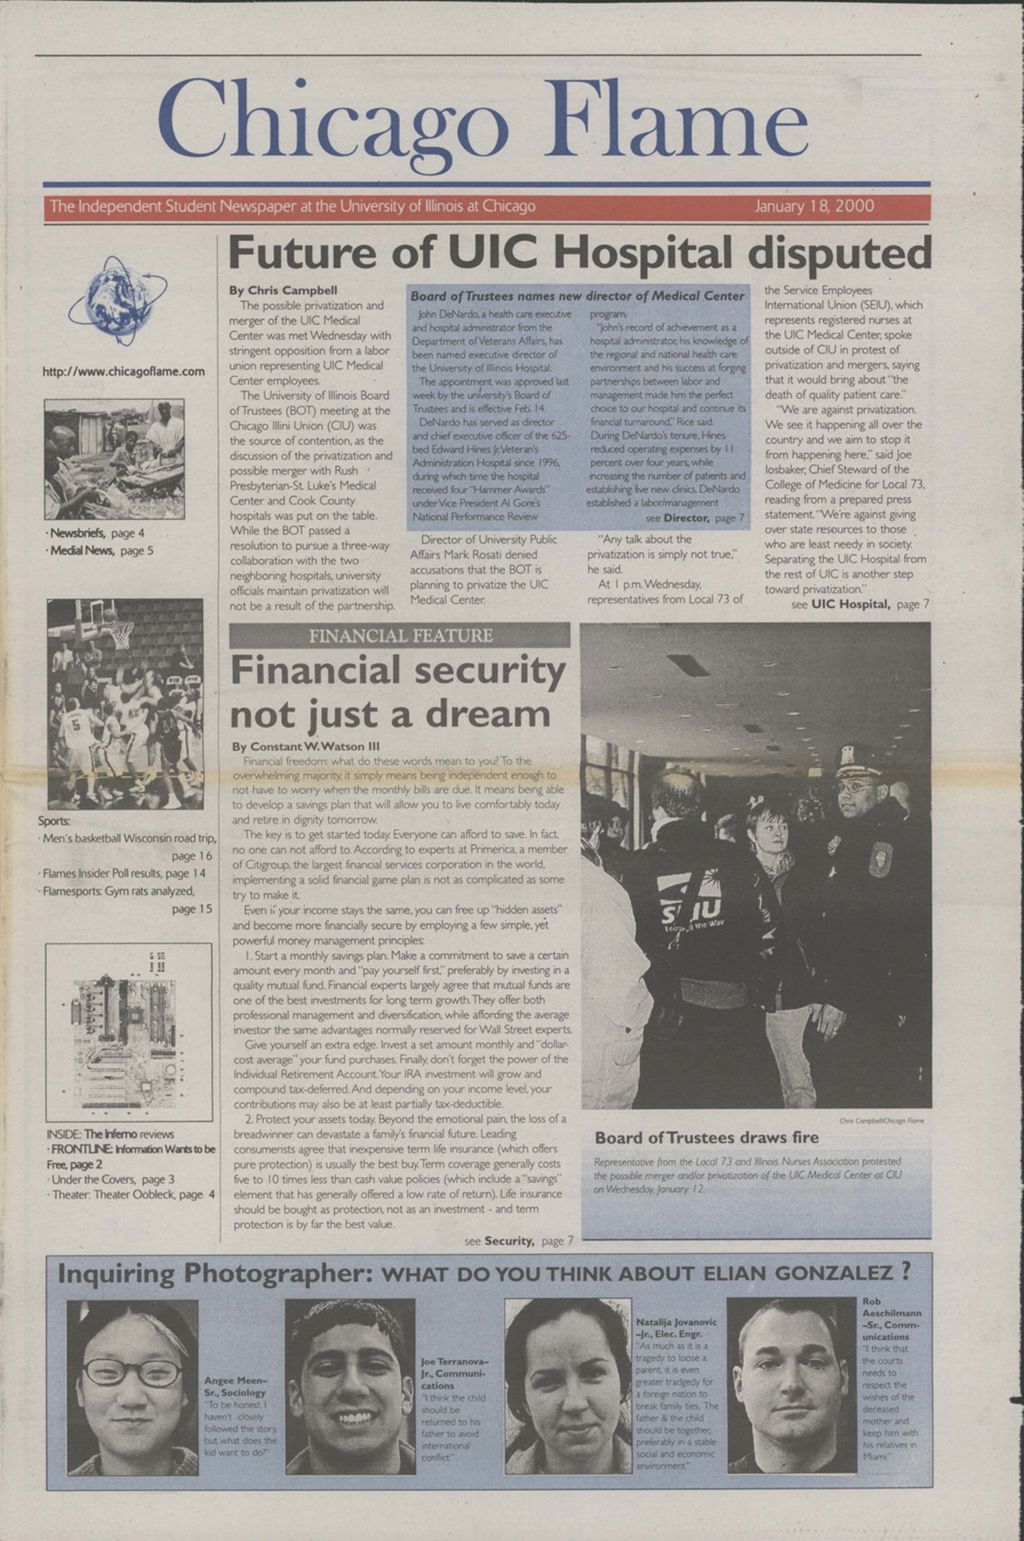 Chicago Flame (January 18, 2000)